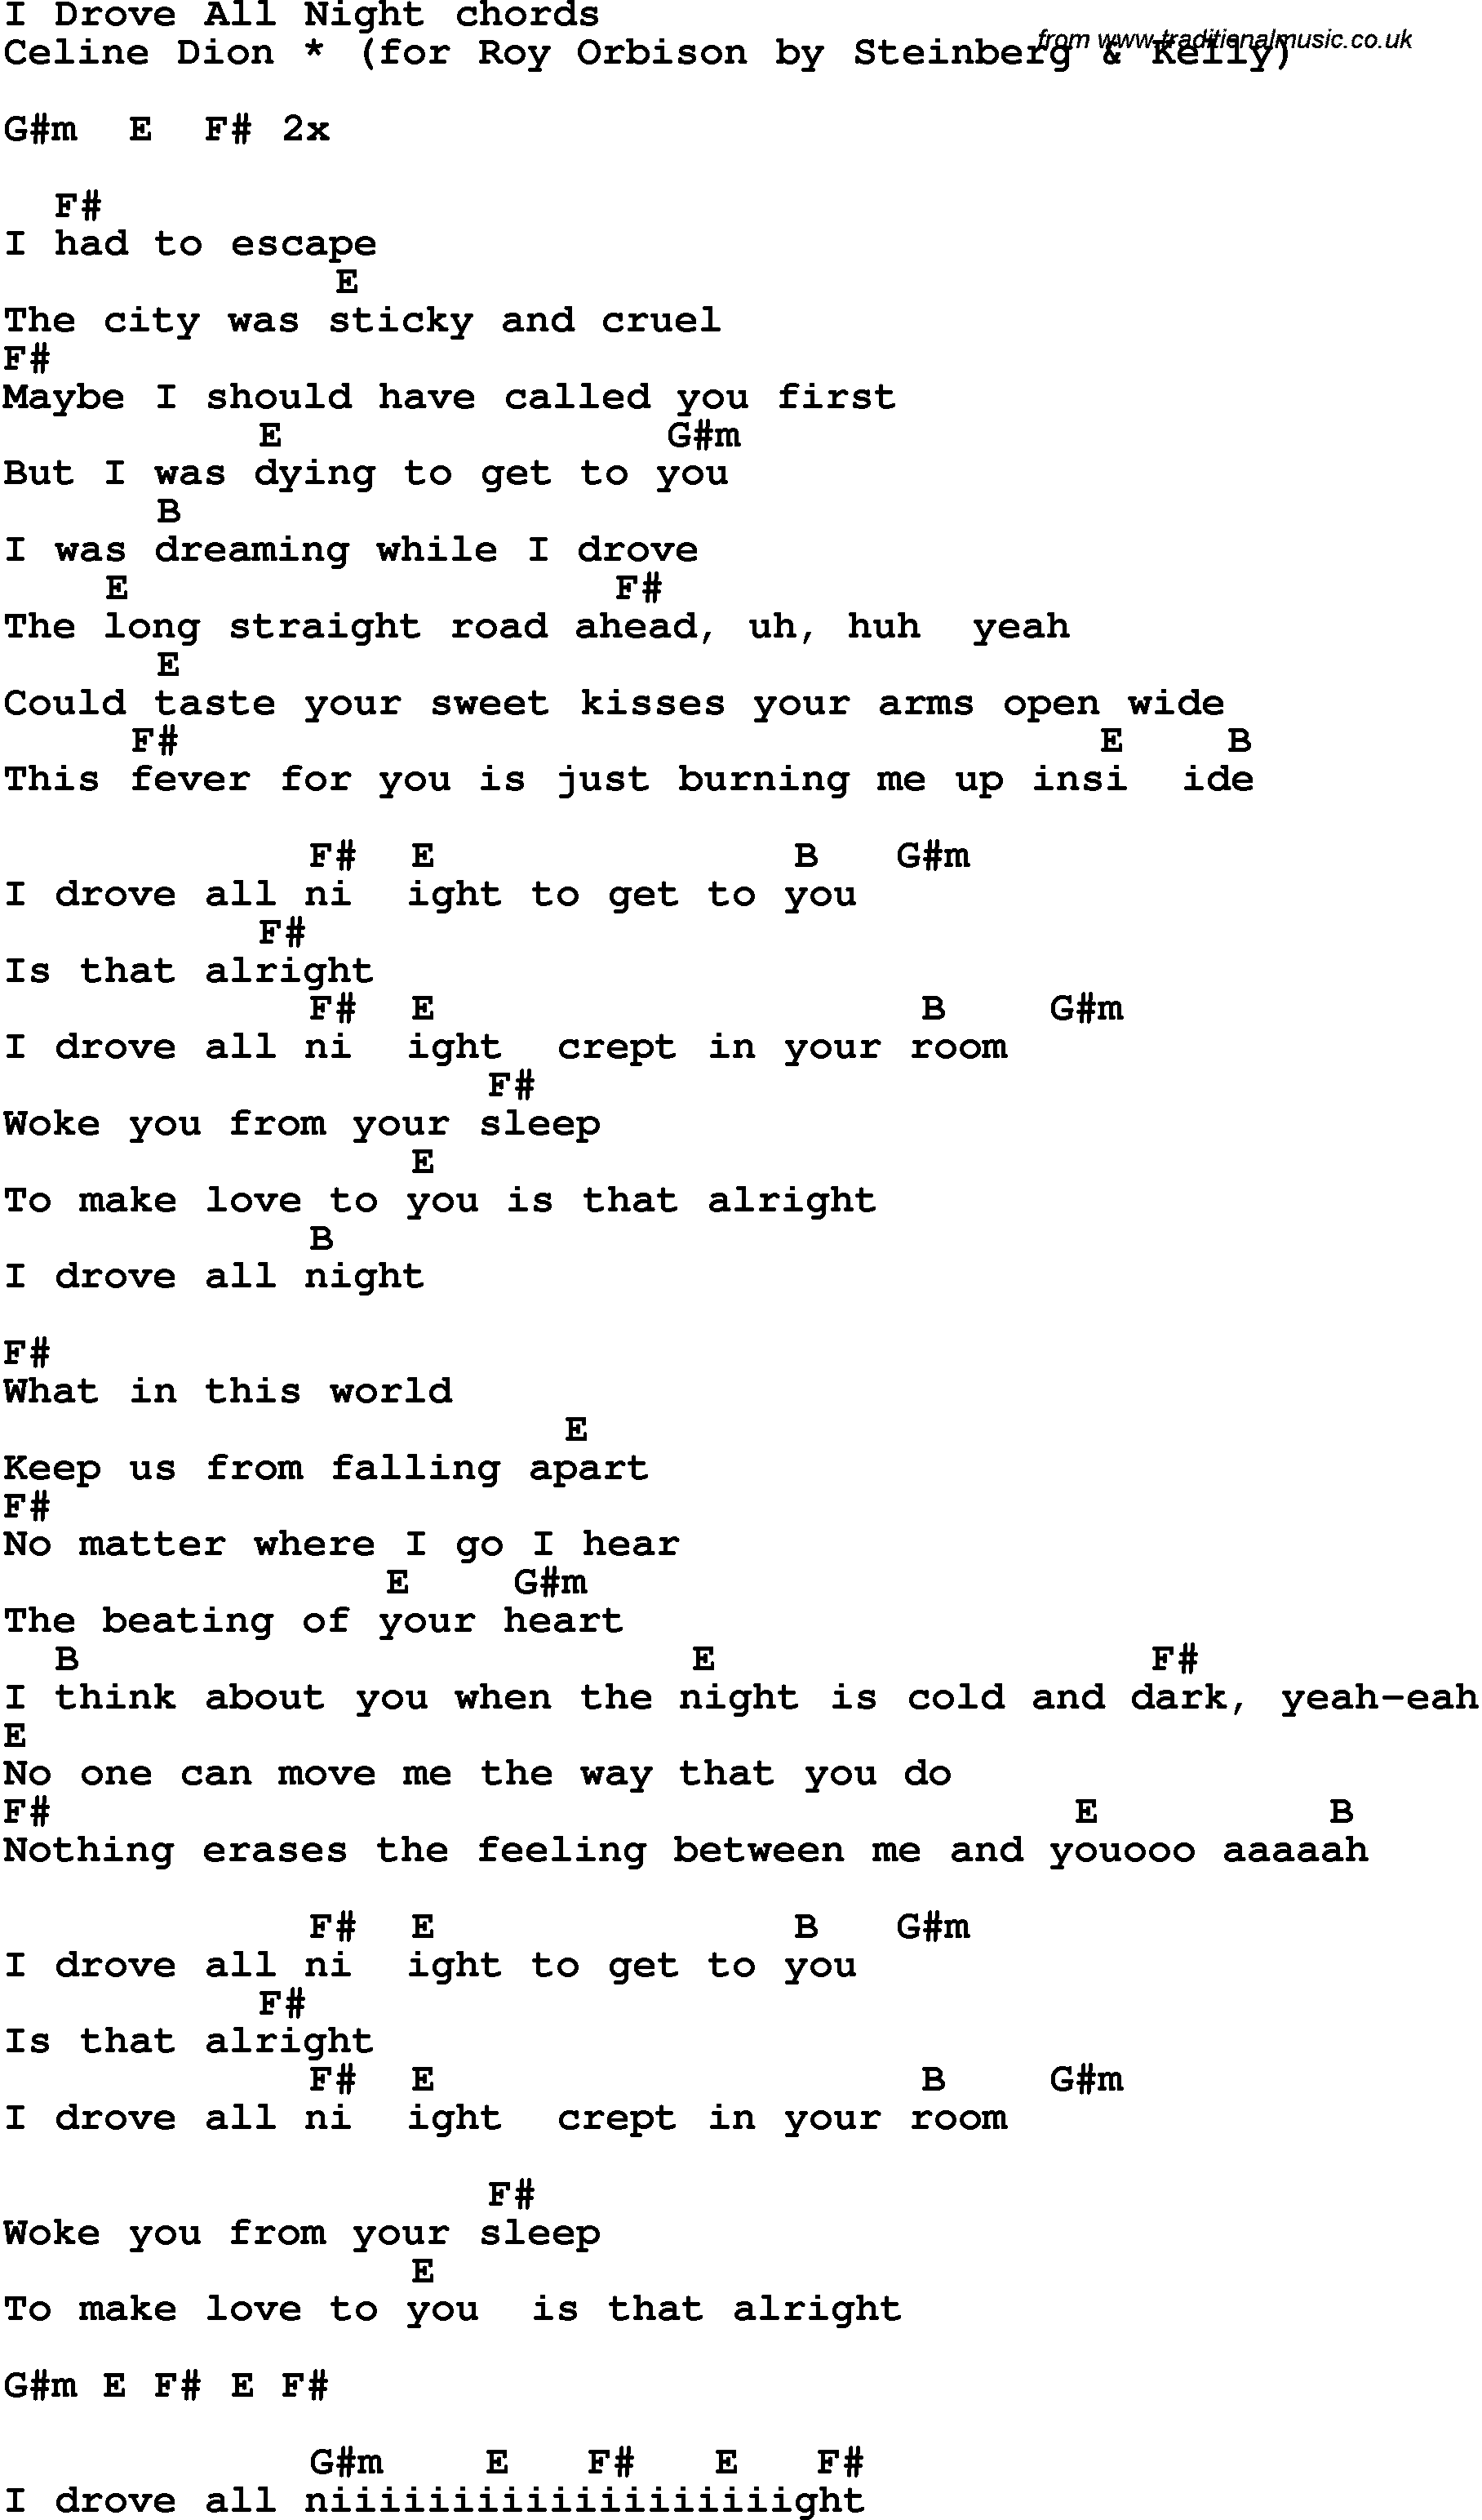 Song Lyrics with guitar chords for I Drove All Night